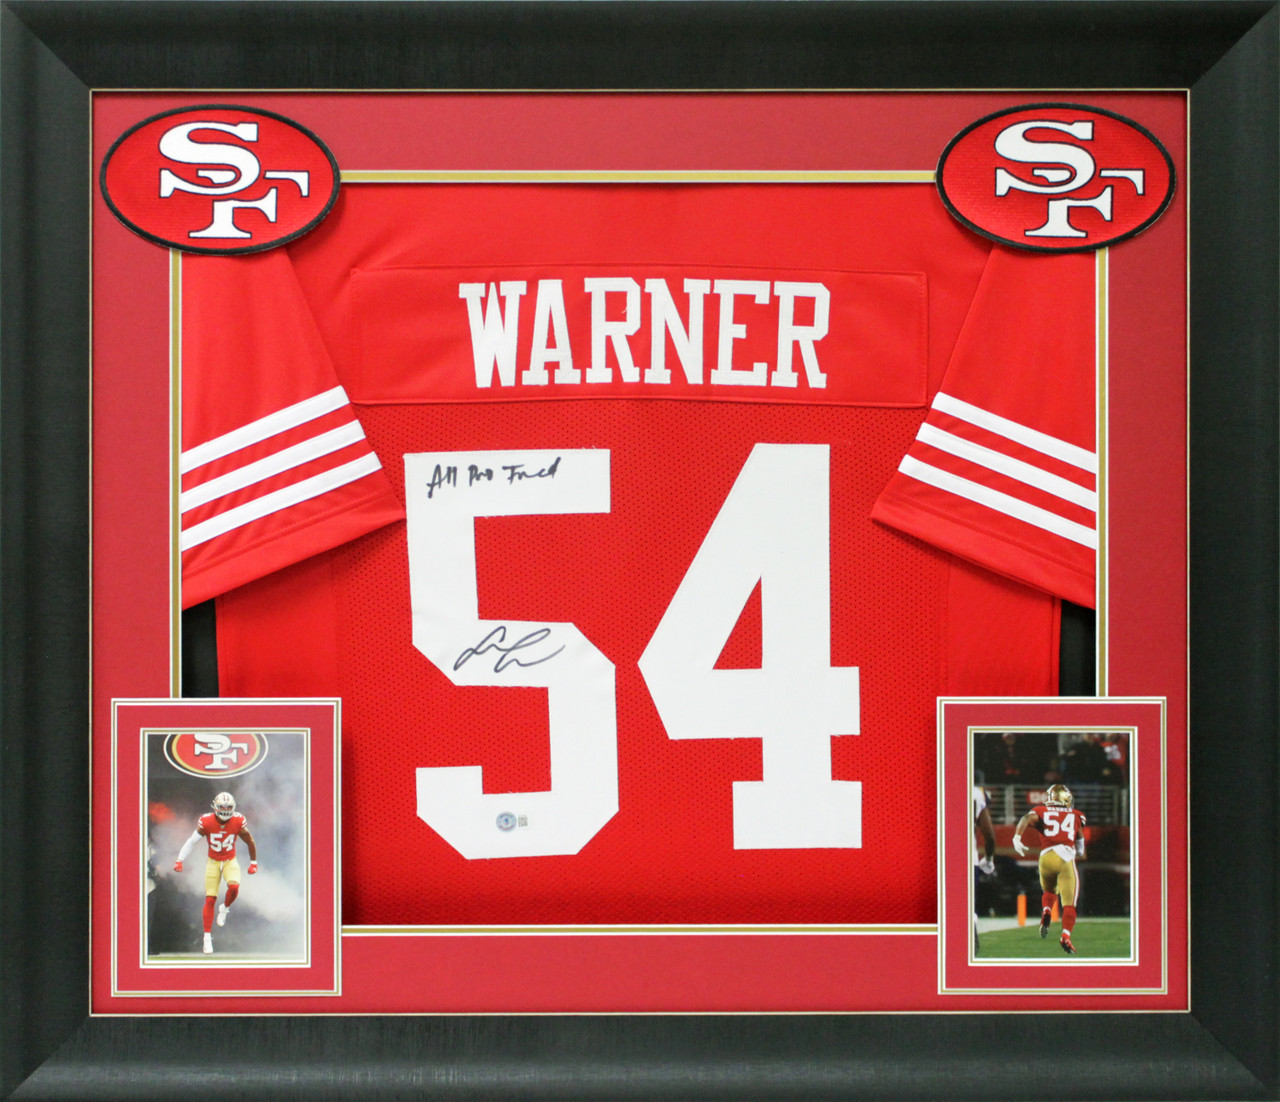 Fred Warner 'All-Pro Fred' Signed Red Pro Style Framed Jersey